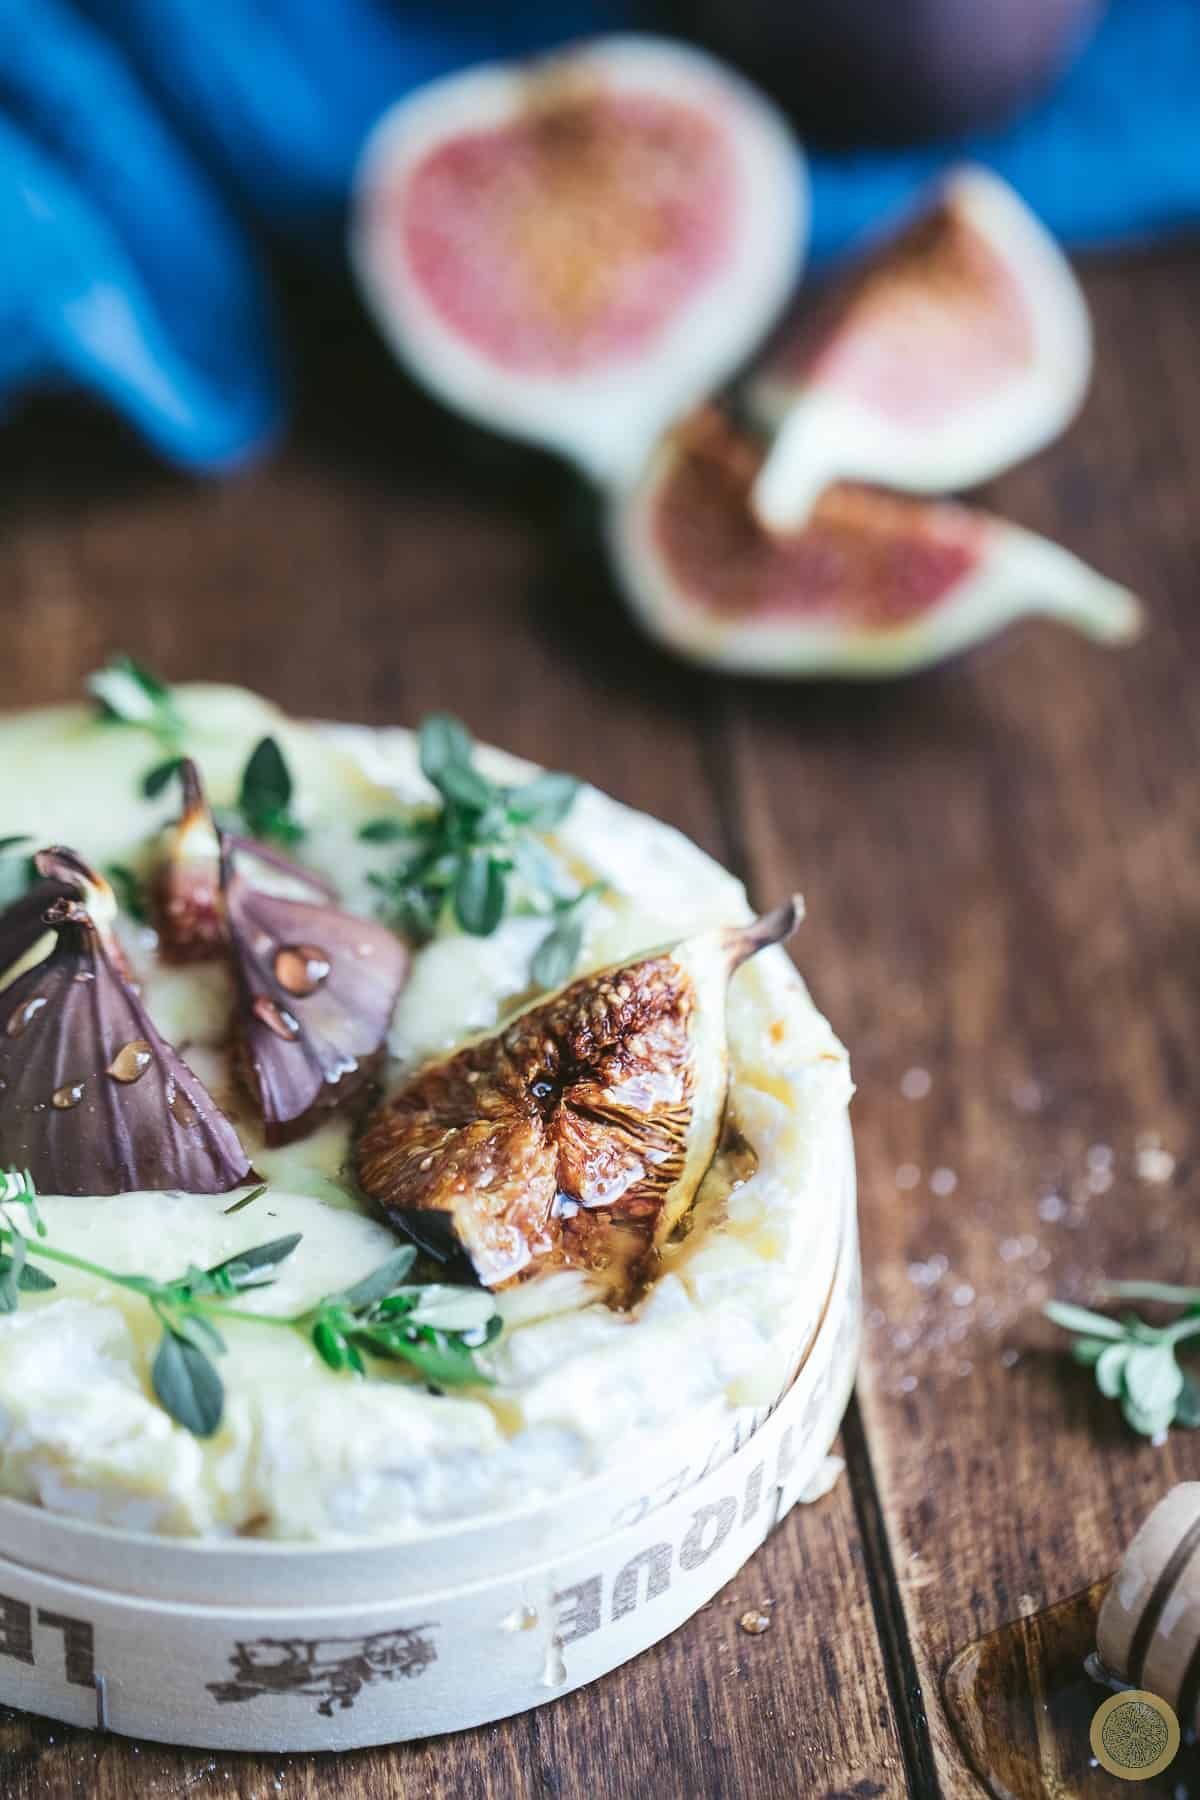 What is Baked Camembert With Figs?